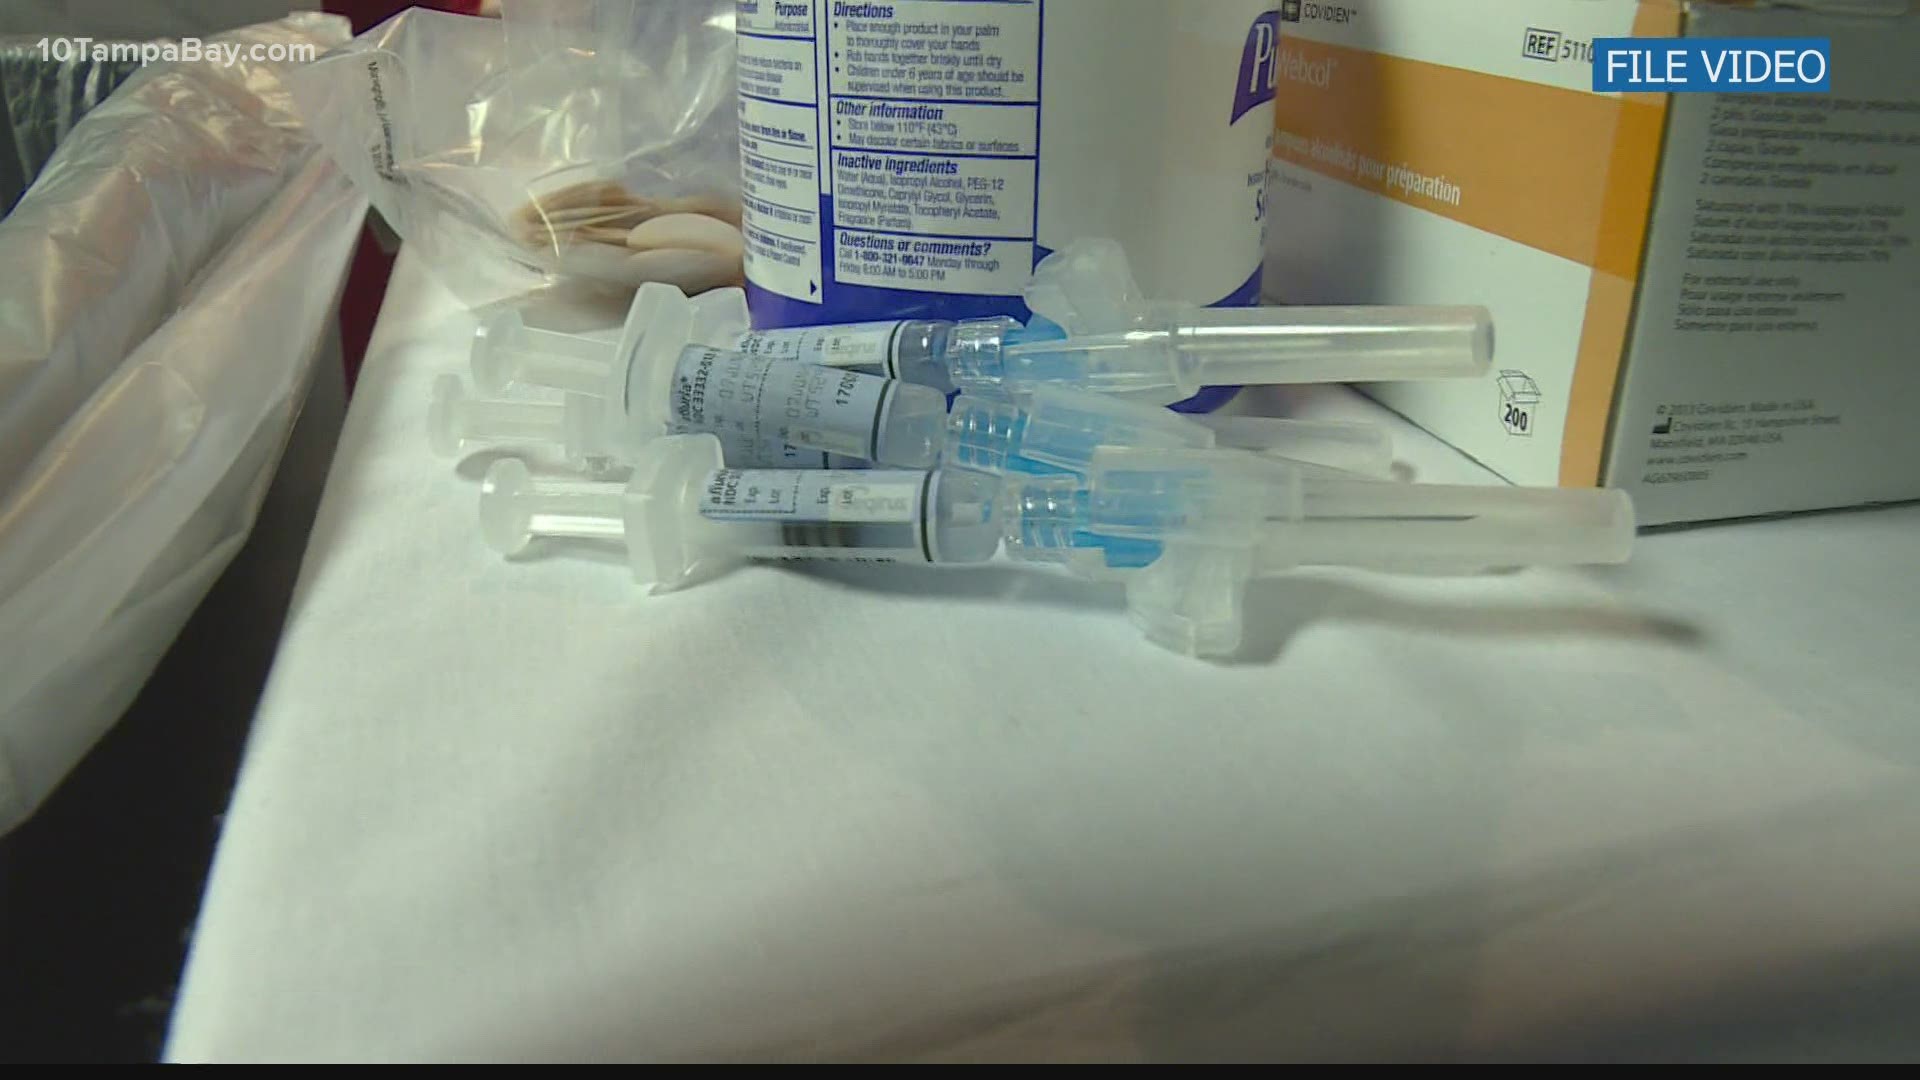 Needles may be scary for some people, but health experts say not getting a flu shot this season could mean disaster.